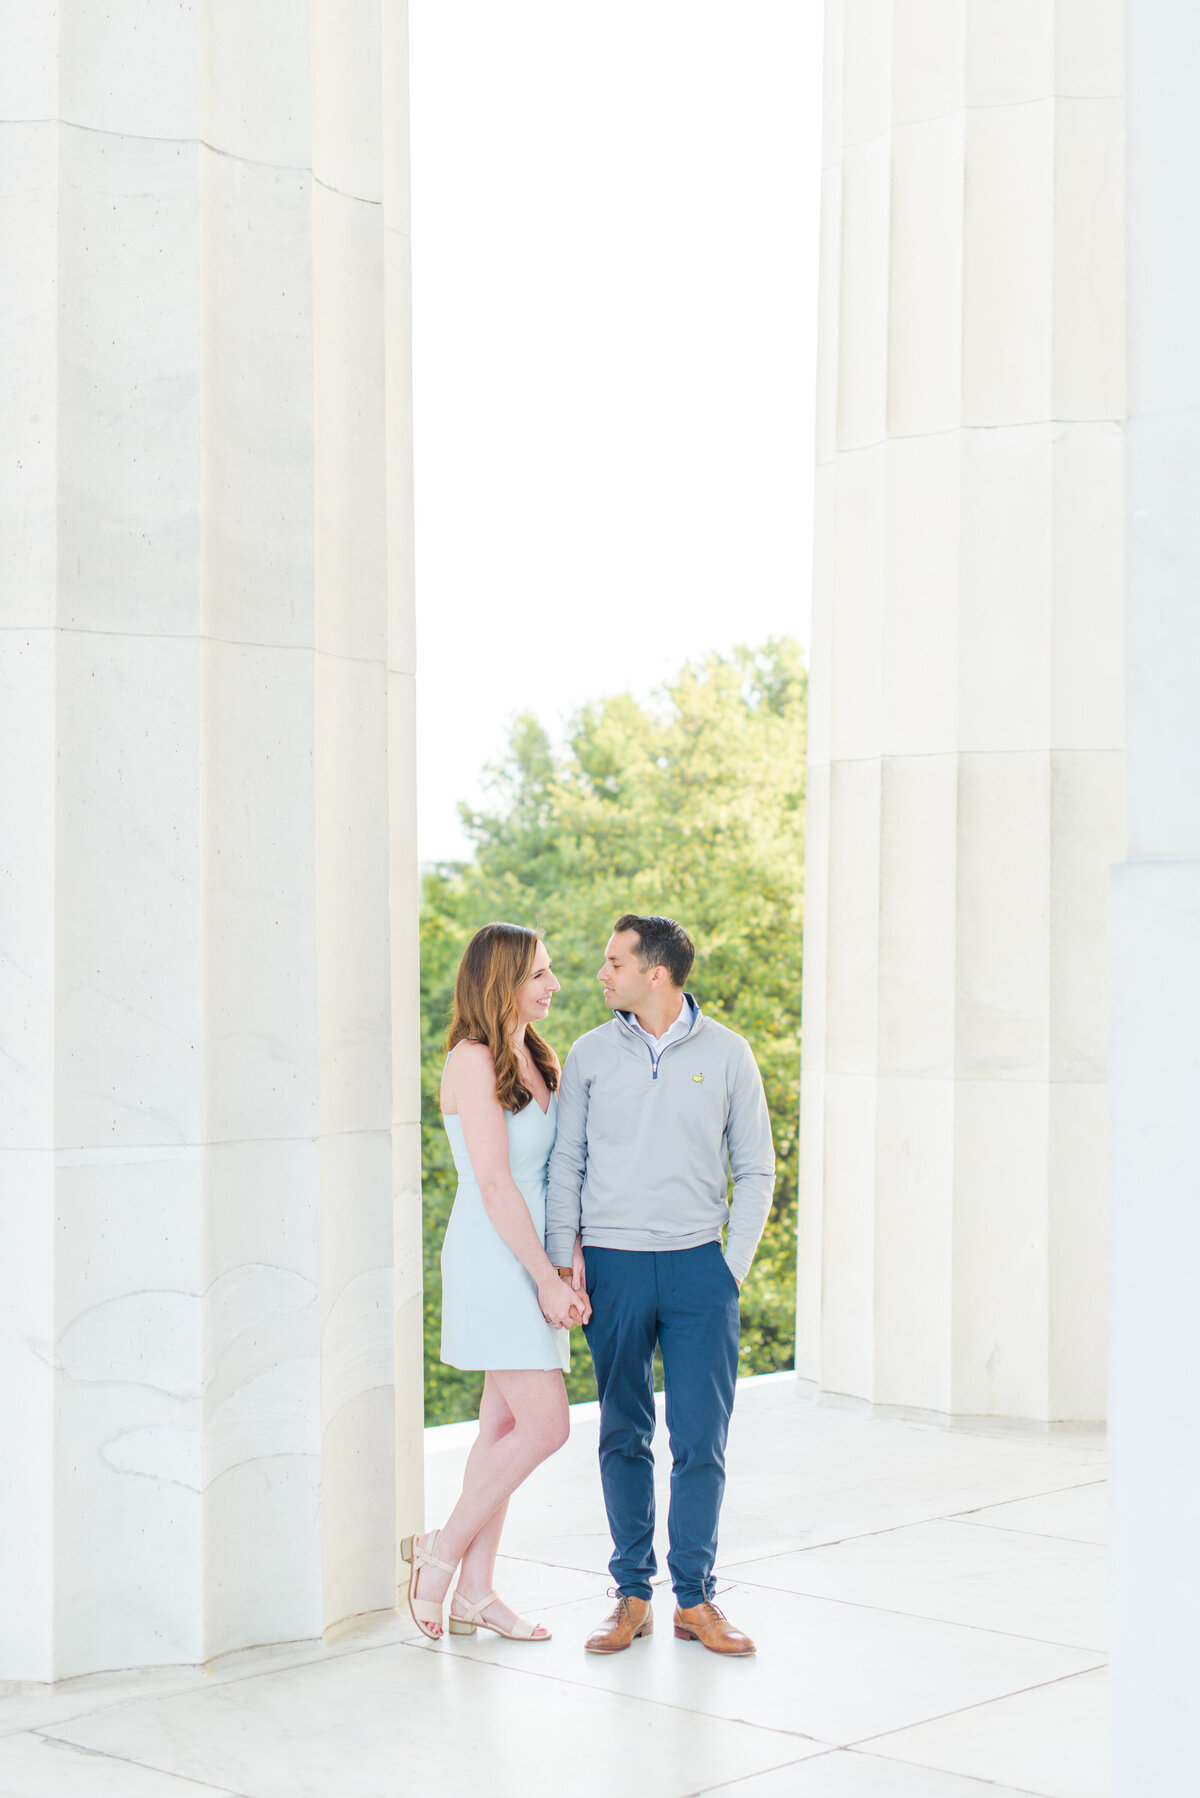 Lincoln Memorial Engagement Photographer in Washington DC